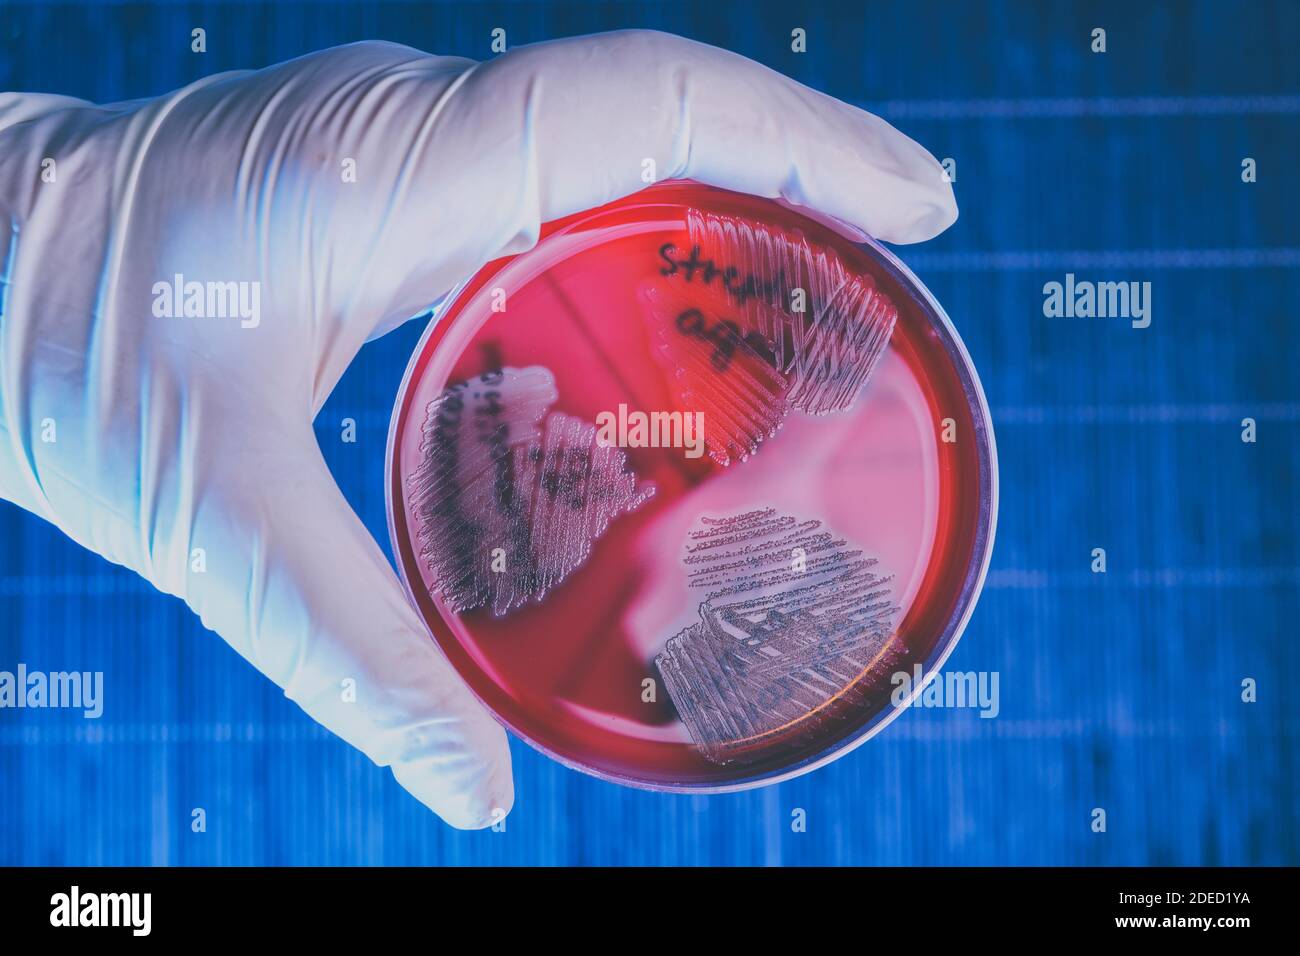 Hand in glove holding Petri plate with bacteria Steptococcus Phaemolifticus G, Streptococcus Agalactiae, Streptococcus Phaemolifticus Stock Photo